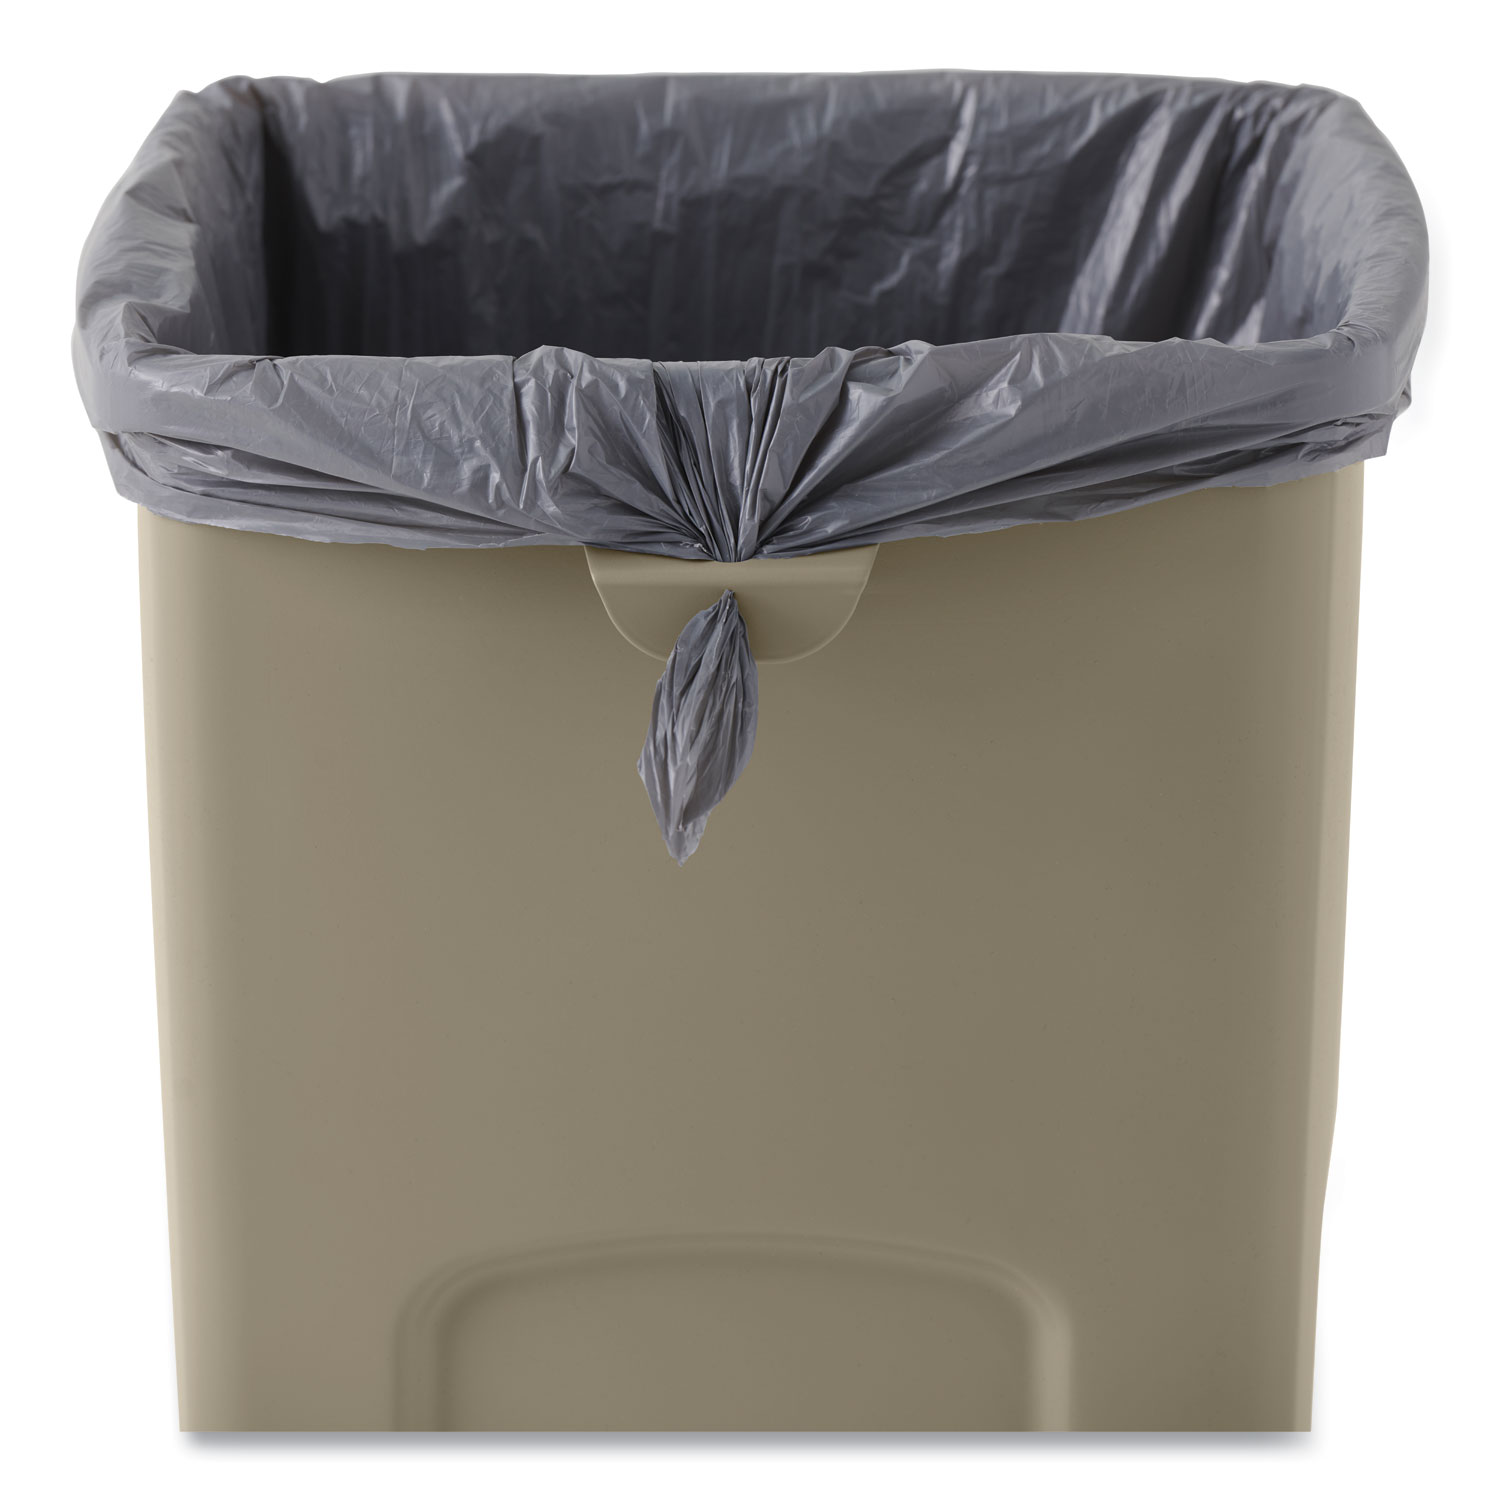 Rubbermaid Commercial Trash Can,Square,23 gal.,Beige FG356988BEIG